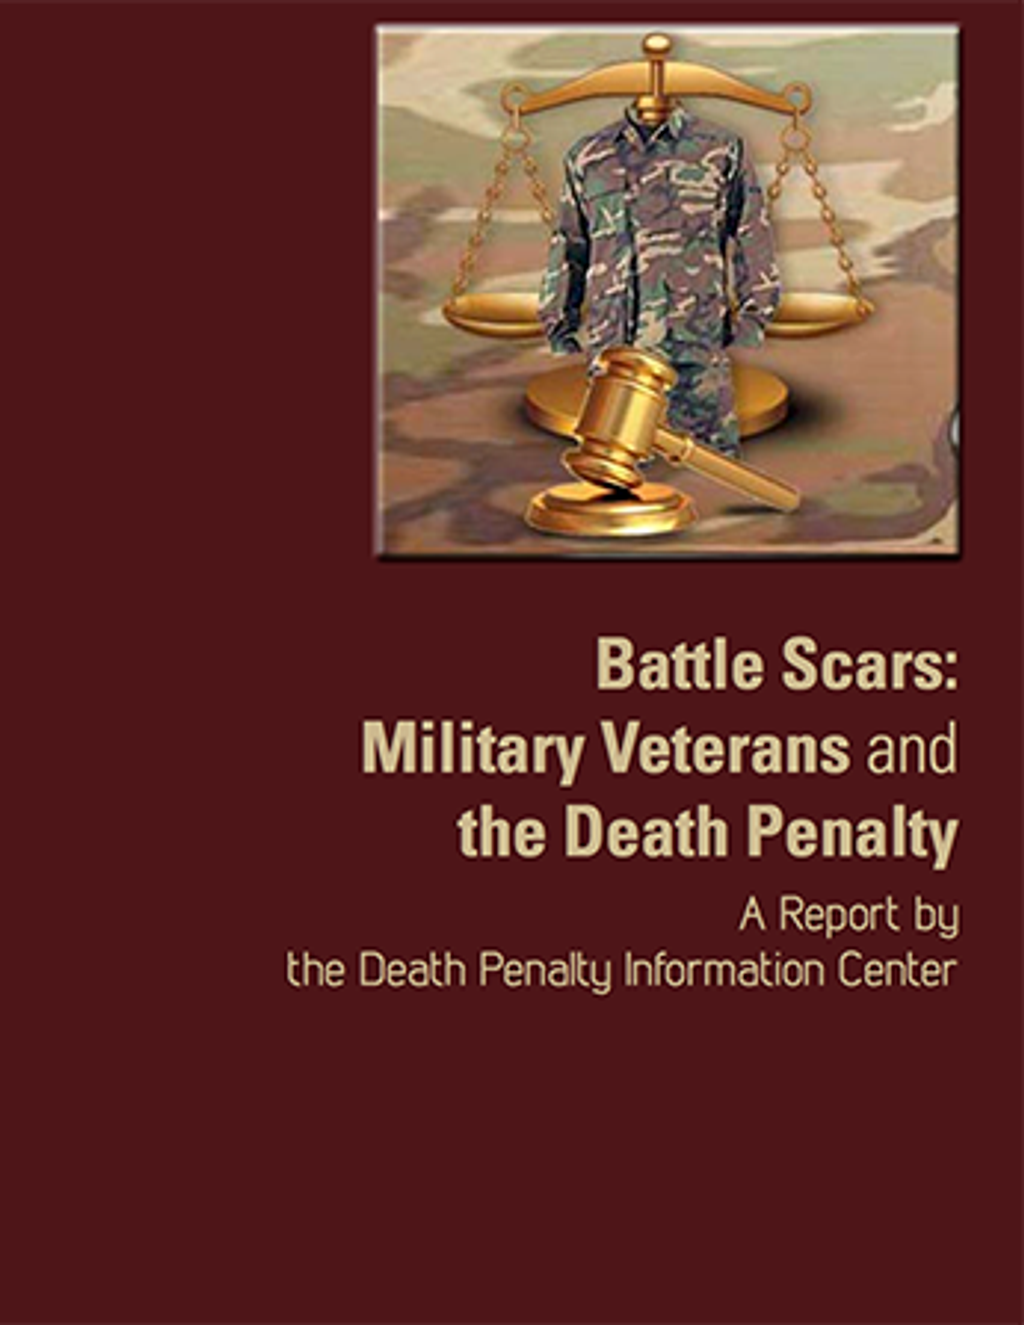 Battle Scars: Military Veterans and the Death Penalty